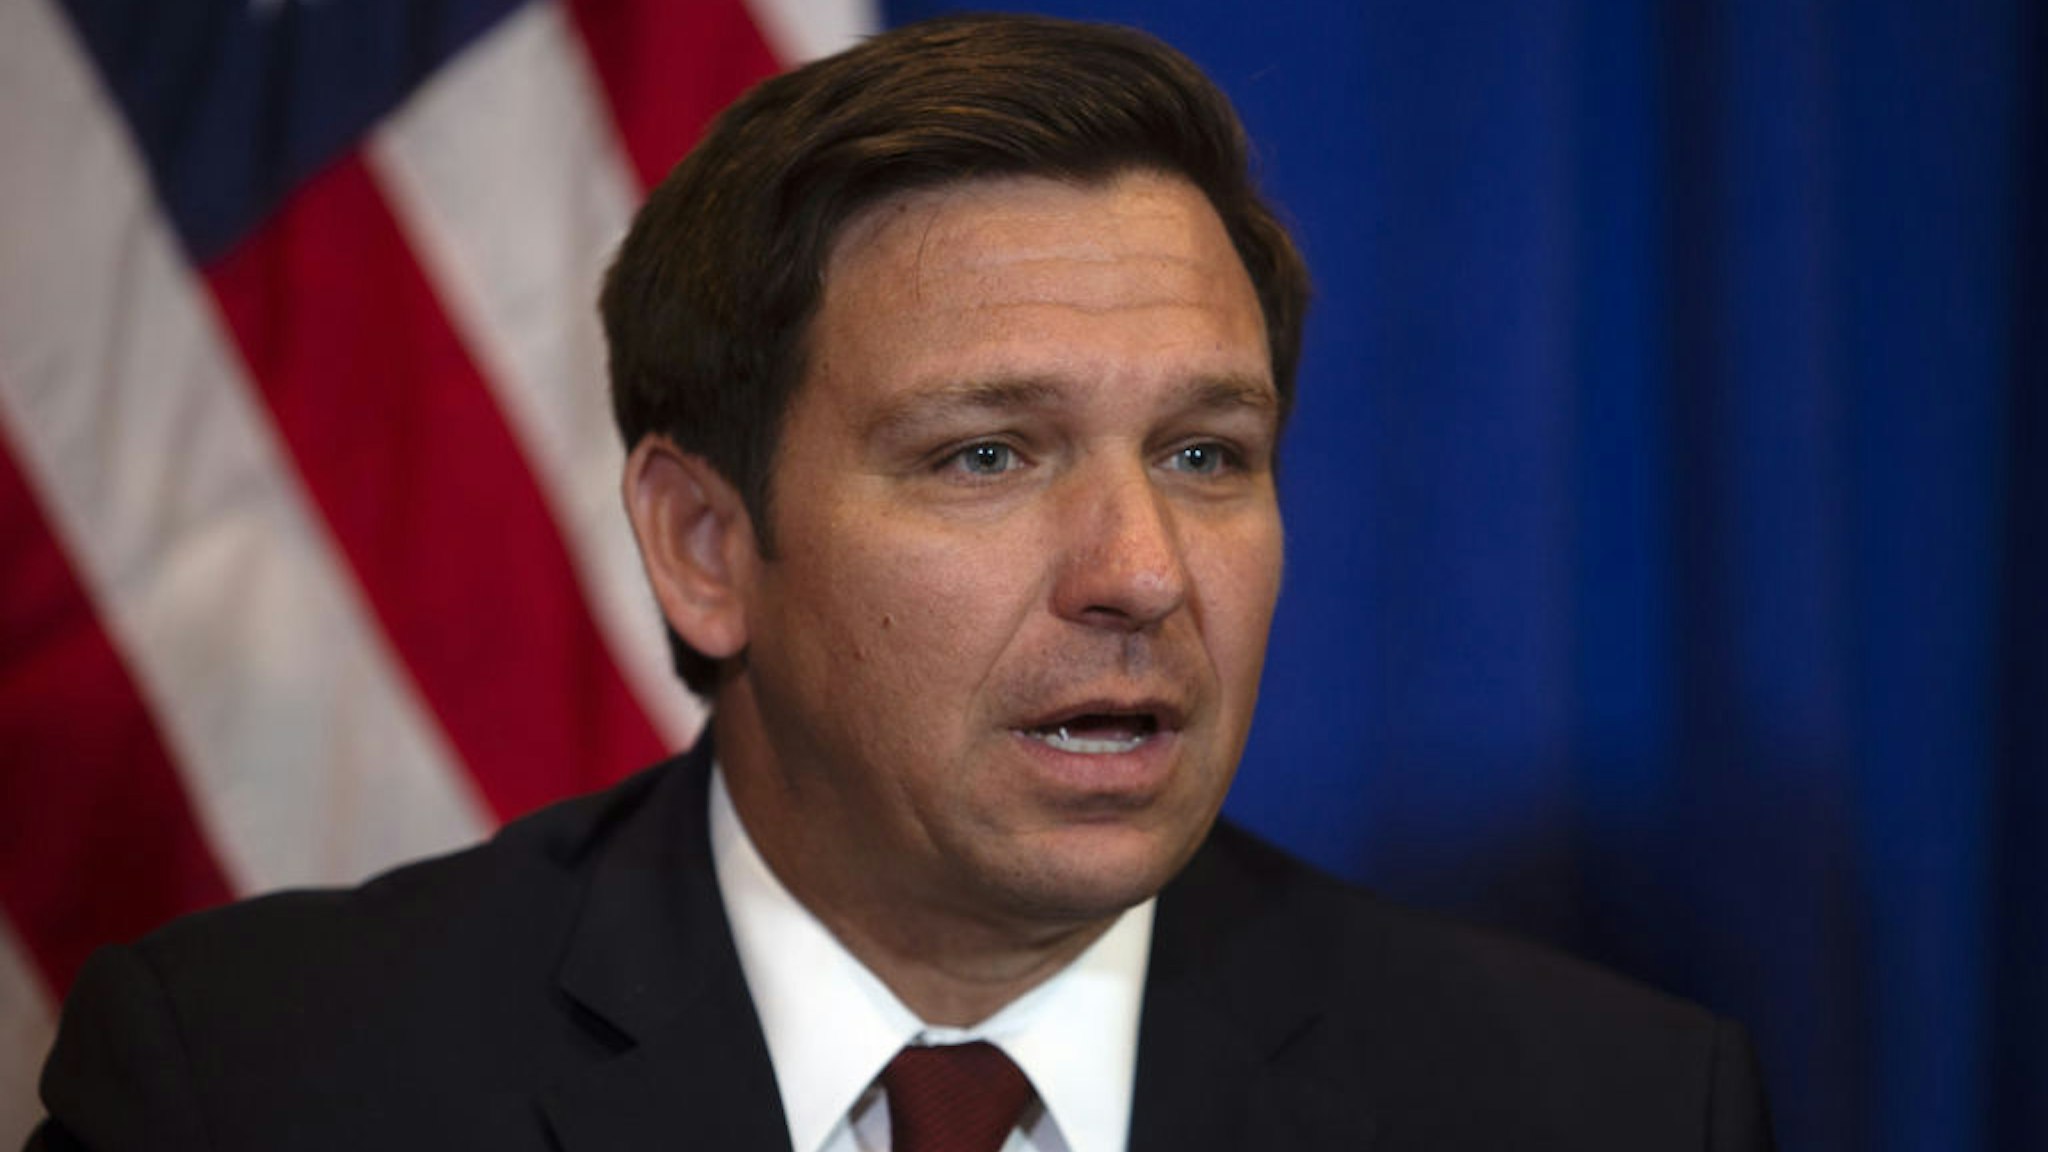 Ron DeSantis, governor of Florida, speaks during a news conference with U.S. Vice President Mike Pence, not pictured, in West Palm Beach, Florida, U.S., on Friday, Feb. 28, 2020.